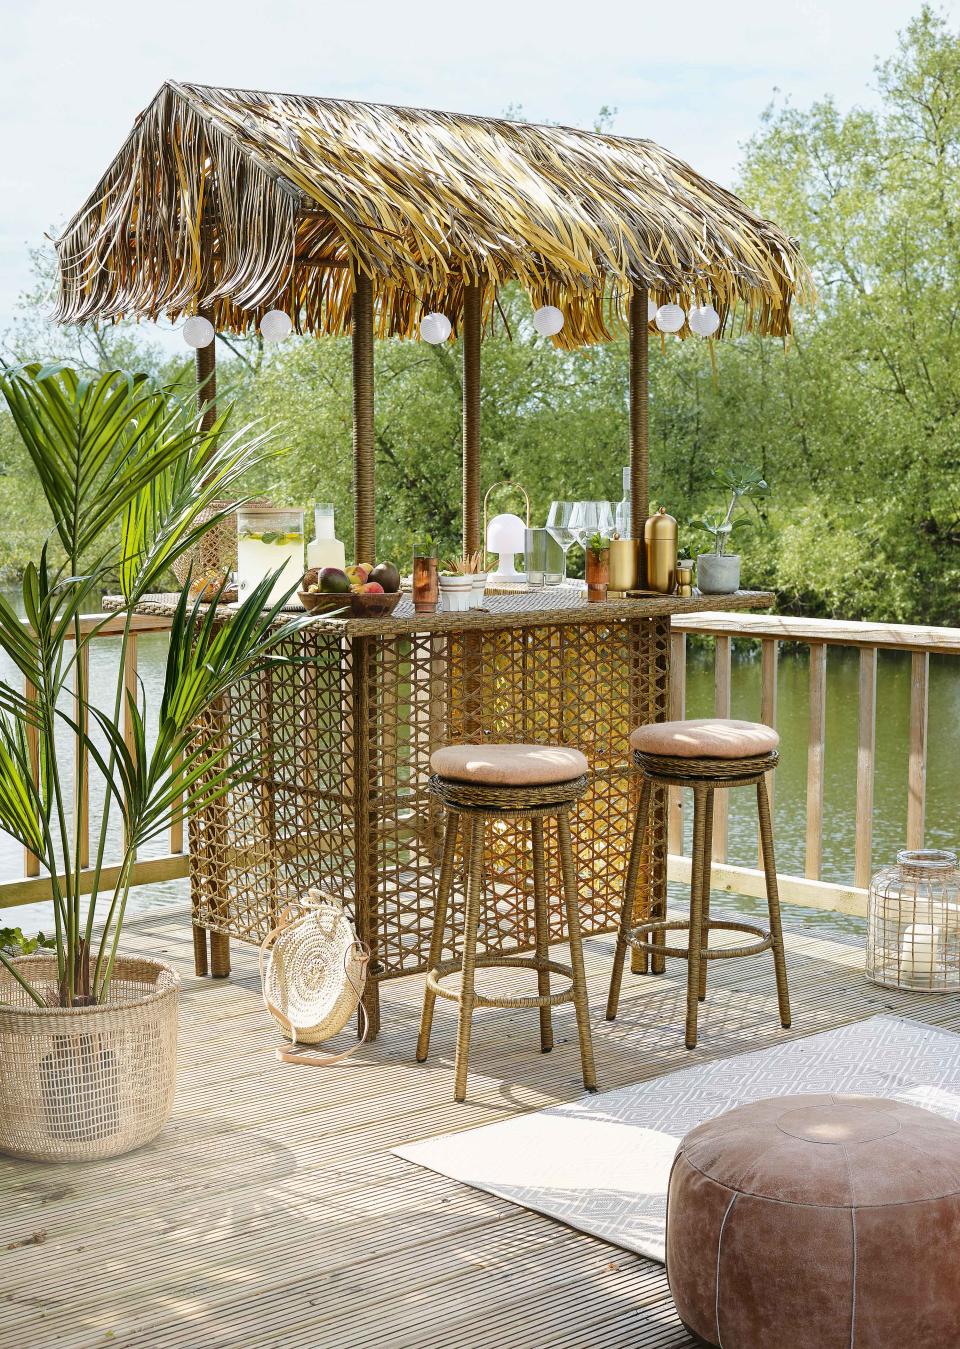 <p> Speaking of vacation vibes, why not go all out, save on the air miles and transform your garden into a paradise with a tropical outdoor bar? A rattan-style setup with thatch-inspired roof is just what you need for a laid-back, beachy vibe. </p> <p> Pop a palm or two nearby and add a string of festoon lights for a welcoming glow after dark. And for a grown-up take on the theme, keep colors neutral and materials natural. </p> <p> All that's left to do is rustle up a piña colada – you'll be in holiday-mode before you know it. </p>